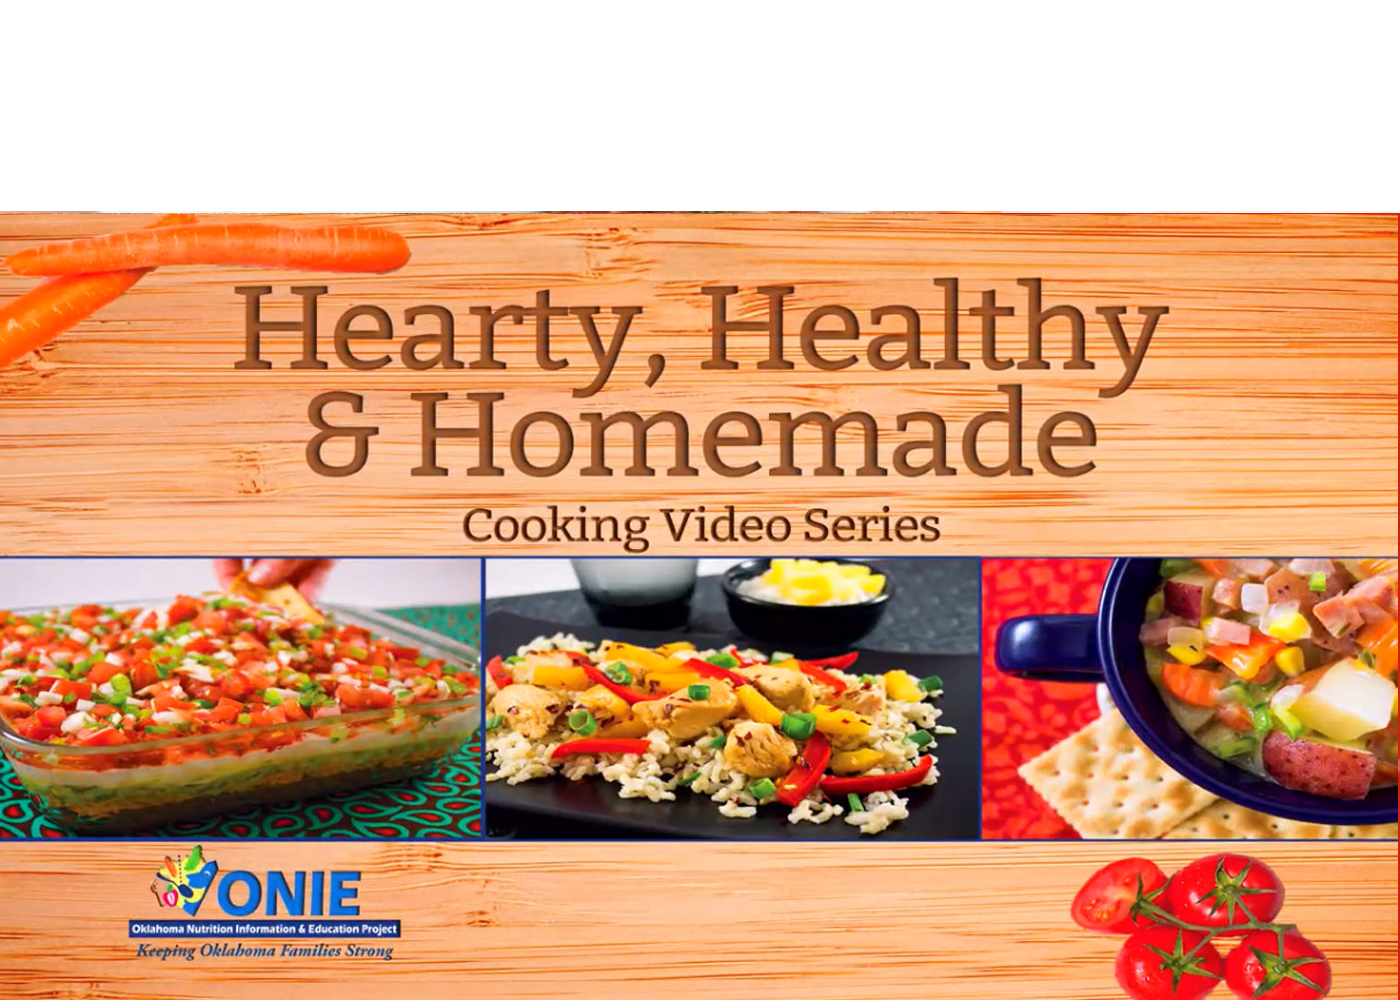 Hearty, Healthy & Homemade Cooking Video Servies ONIE with images of cooked dishes